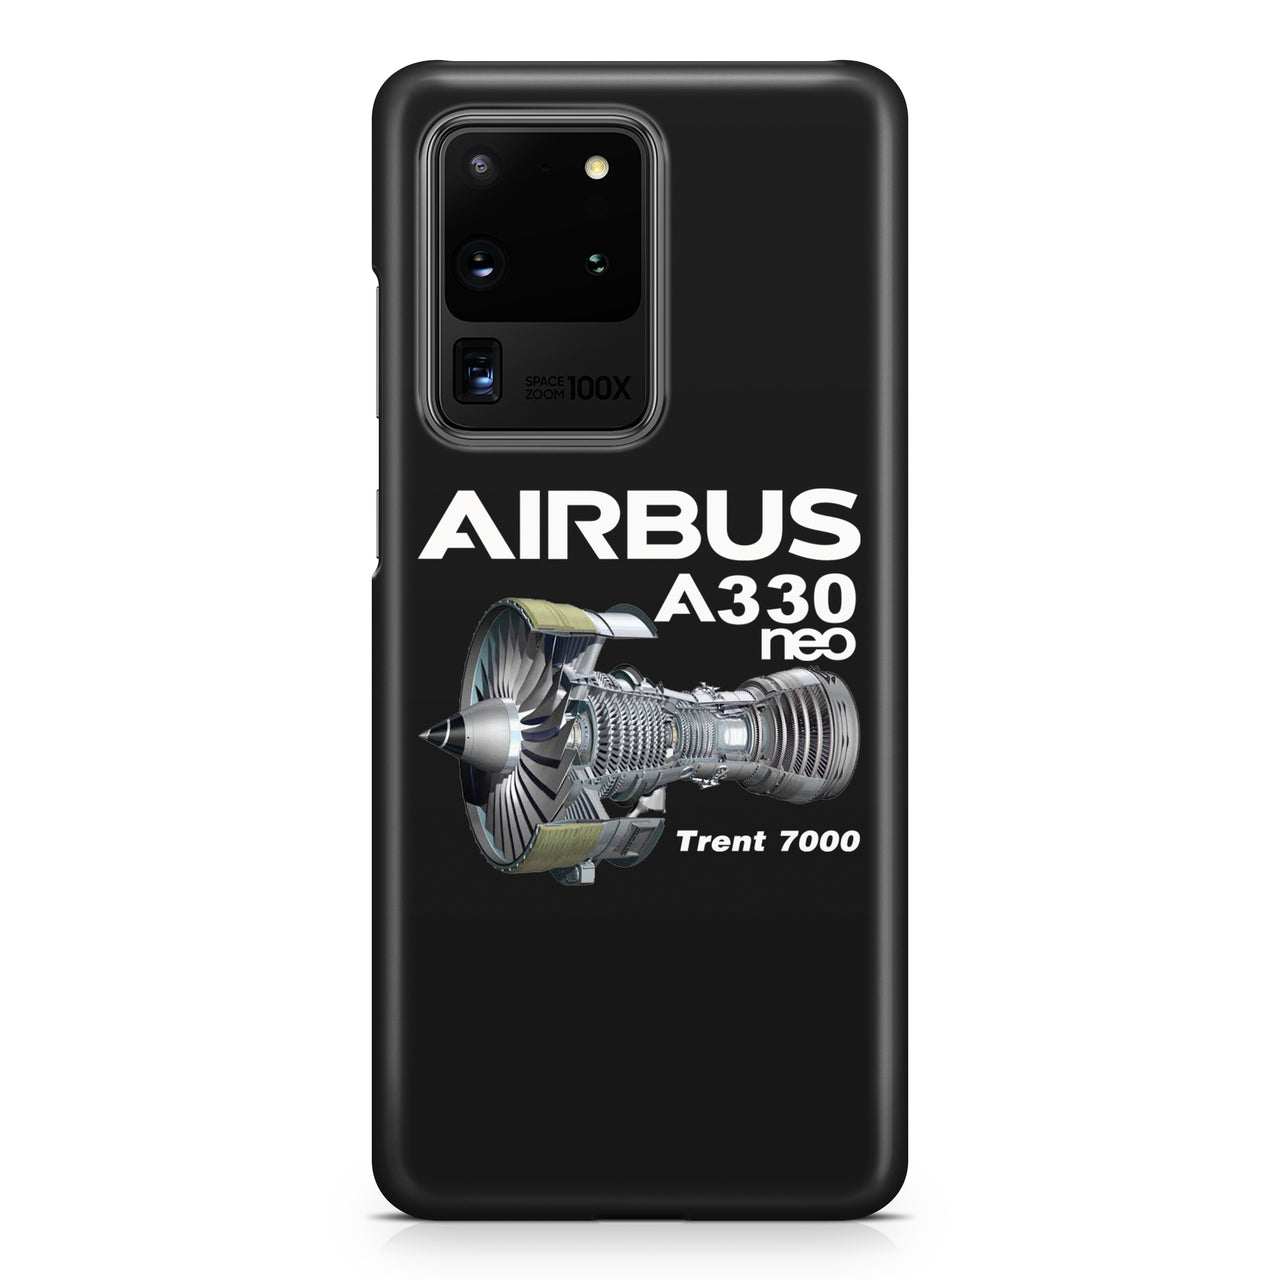 Airbus A330neo & Trent 7000 Samsung A Cases